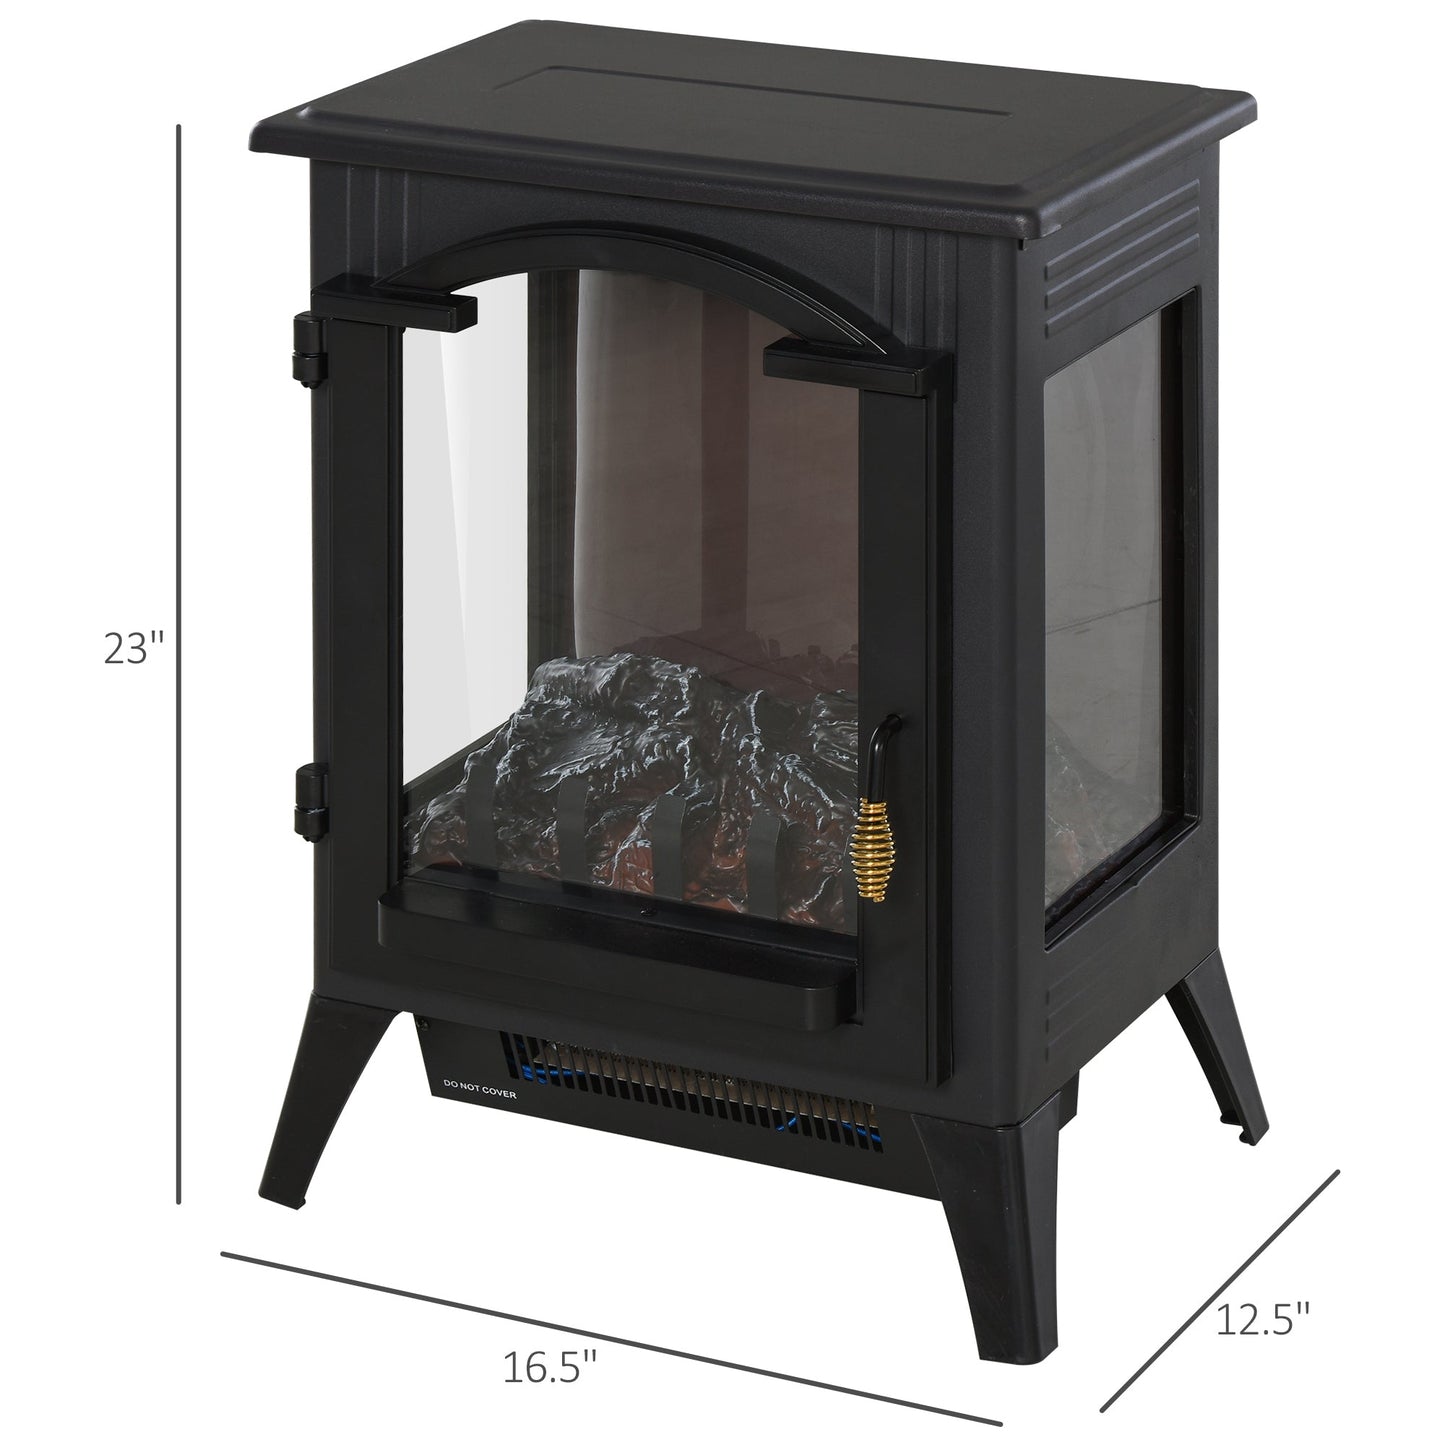 Miscellaneous-23" Electric Freestanding Fireplace, Fireplace Stove with Realistic LED Flames and Logs and Overheating Protection, 750W/1500W, Black - Outdoor Style Company